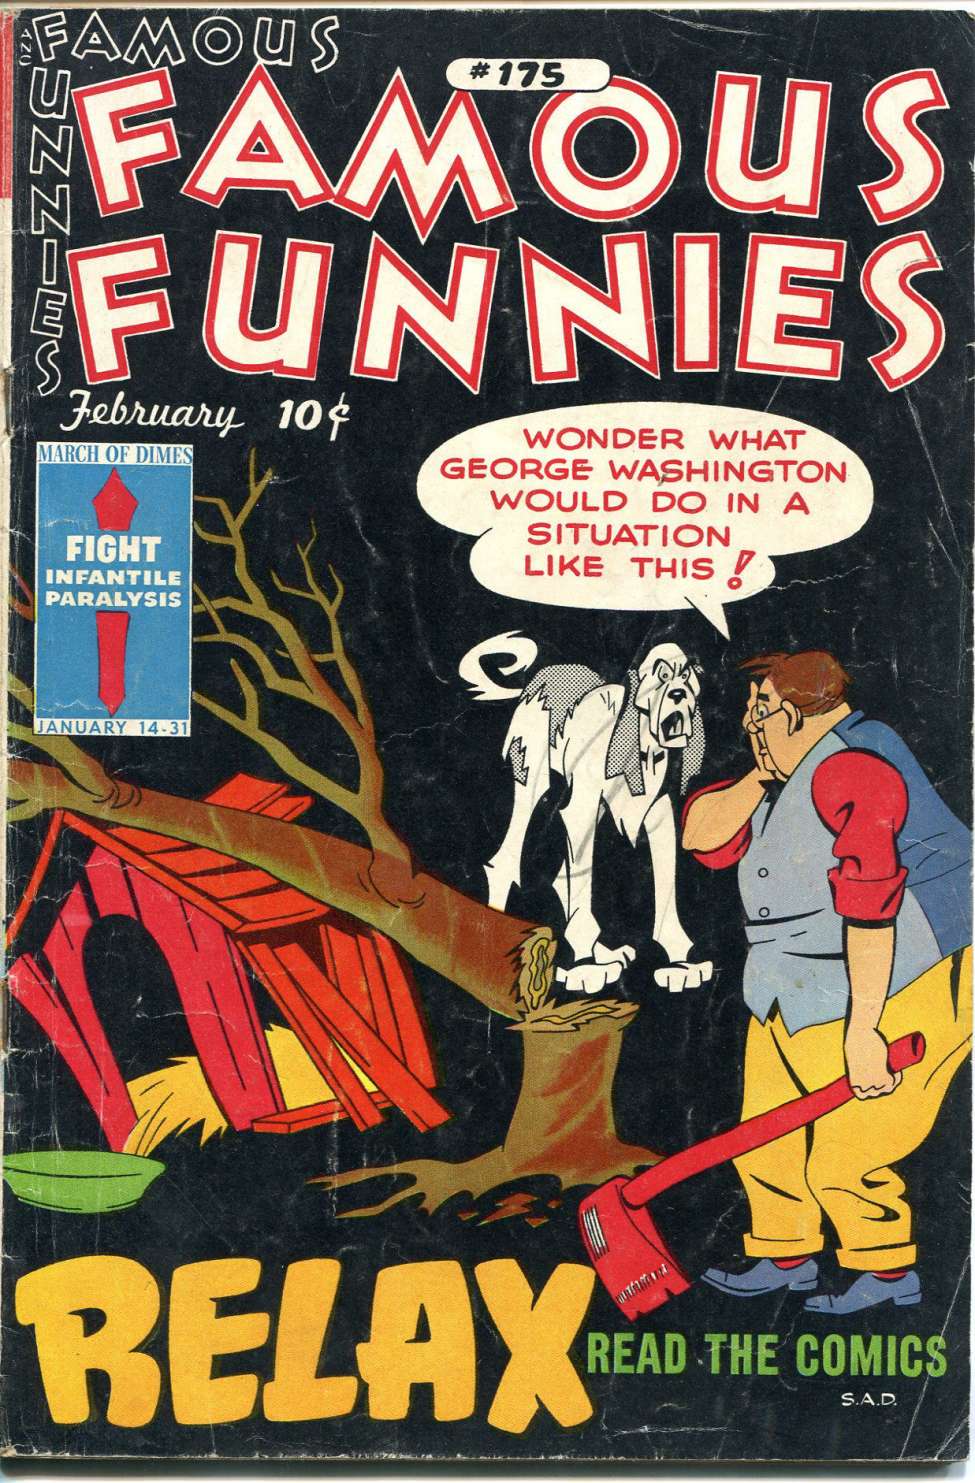 Book Cover For Famous Funnies 175